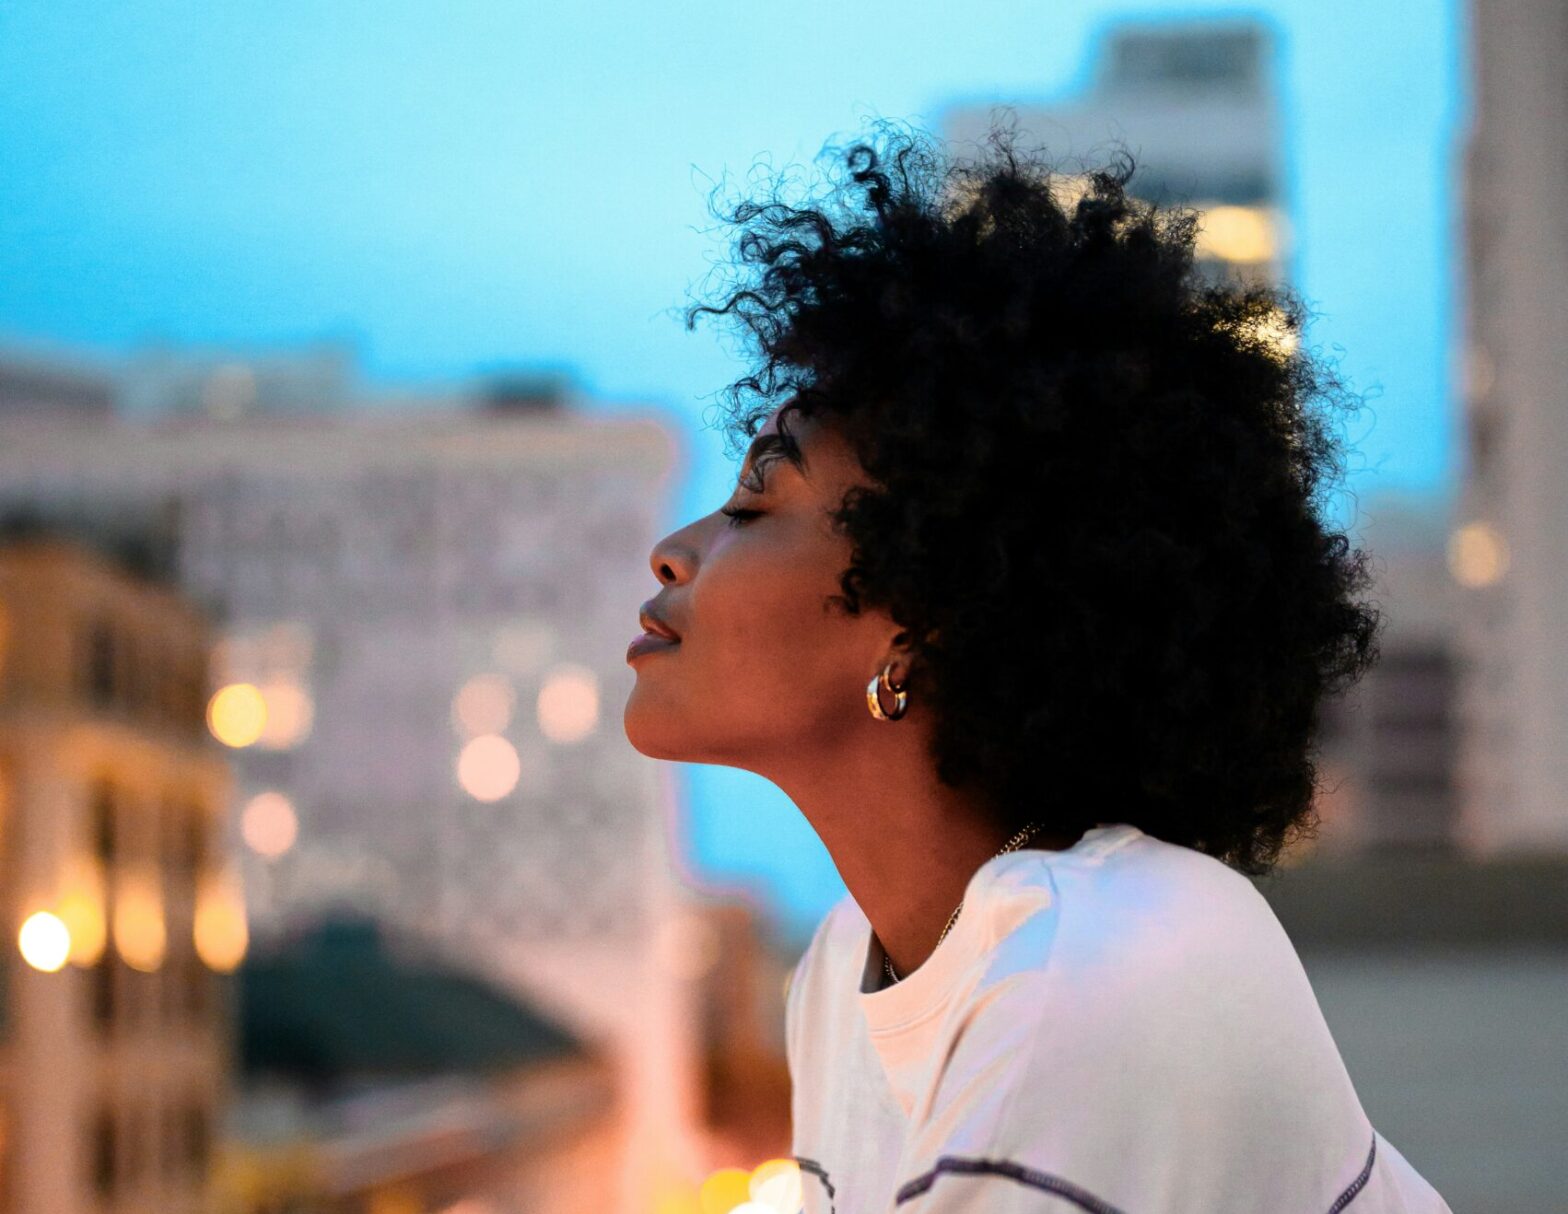 the let them theory explained. pictured: black girl overlooking city